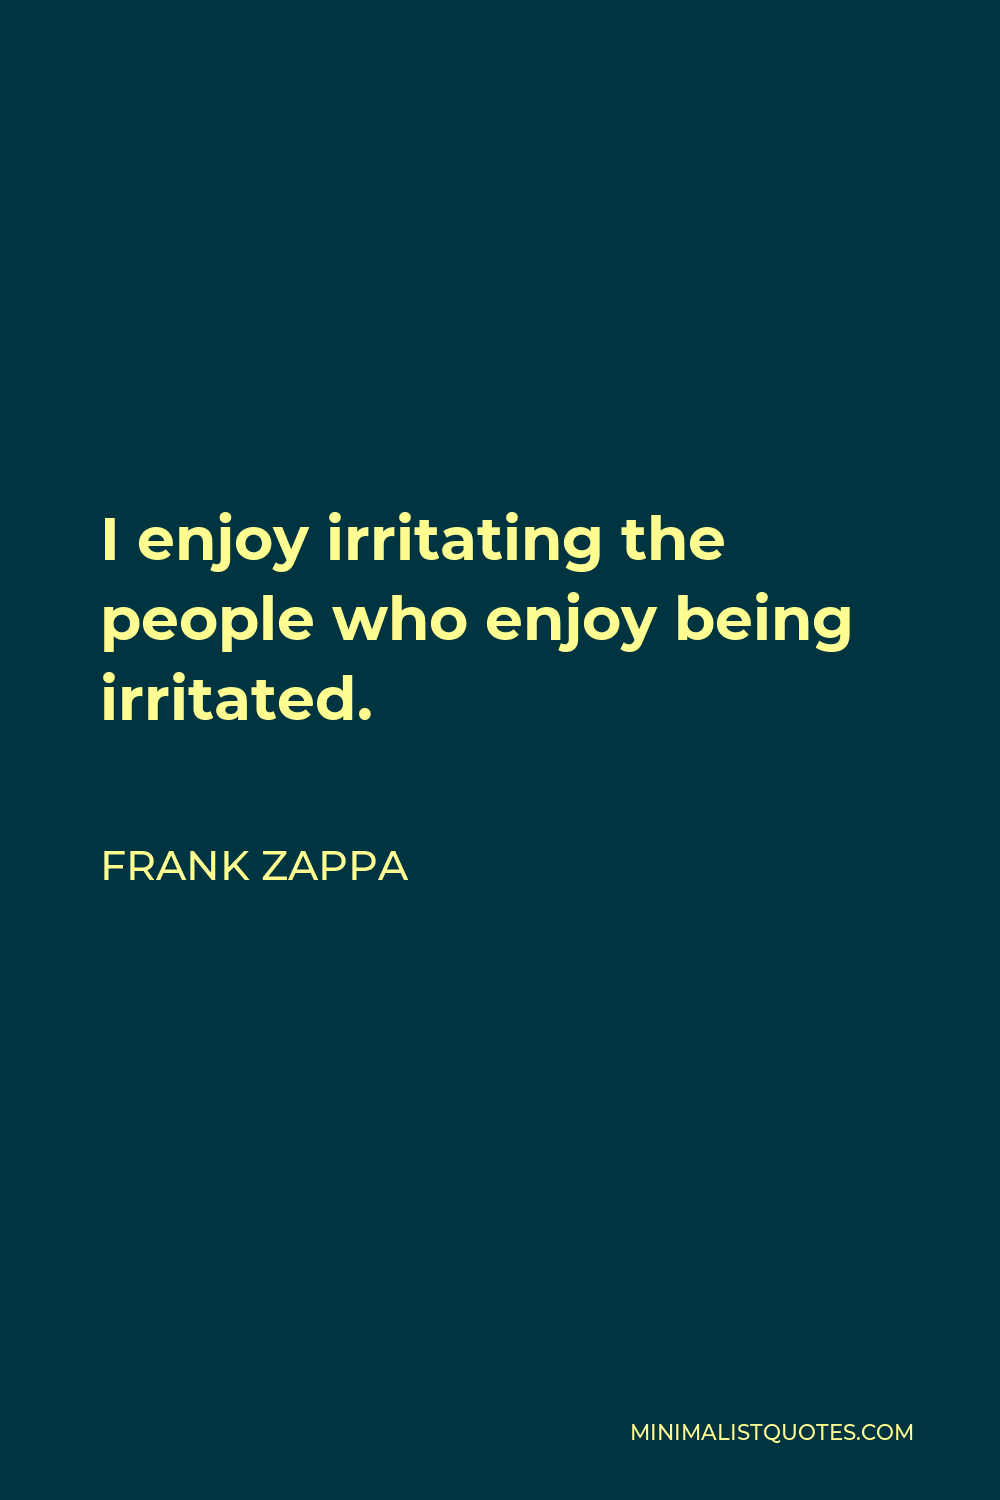 Frank Zappa Quote - I enjoy irritating the people who enjoy being irritated.